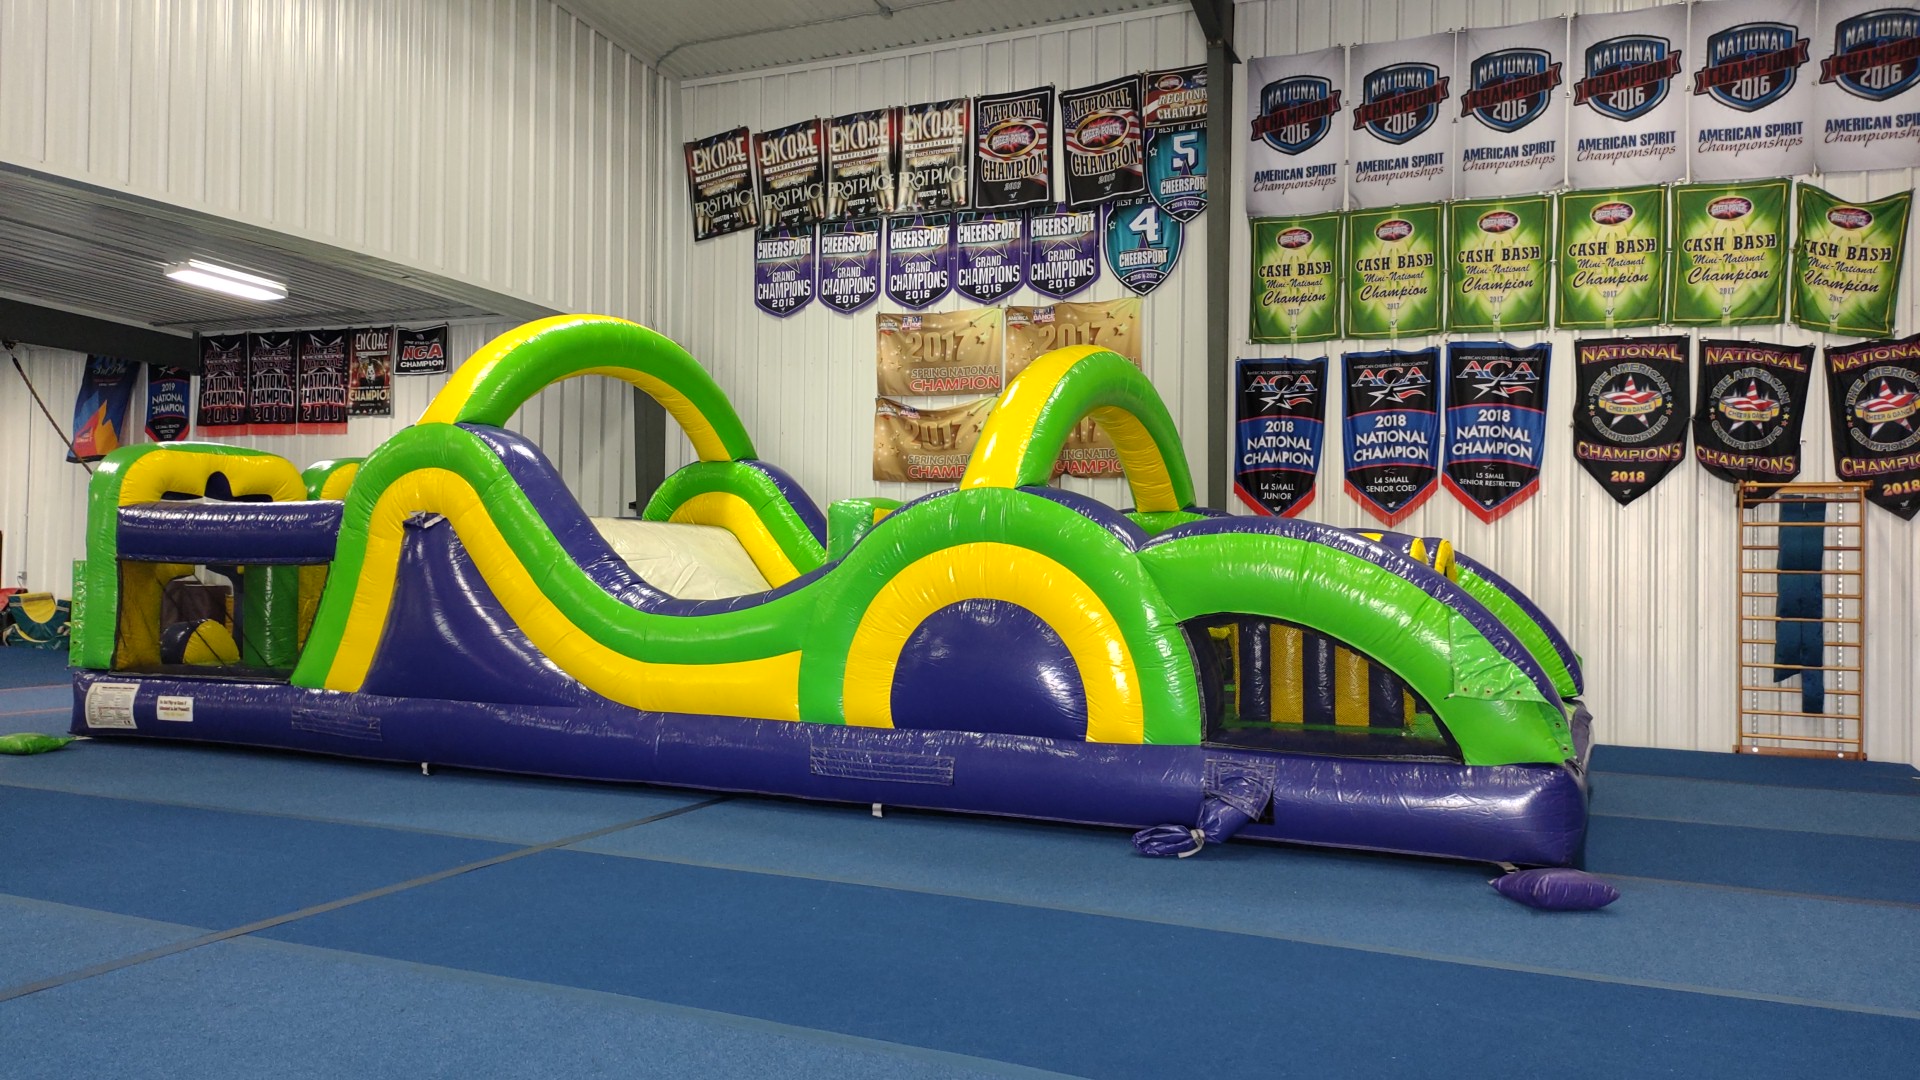 Inflatable Obstacle Course Rentals in Los Angeles - L.A Inflatables Rental